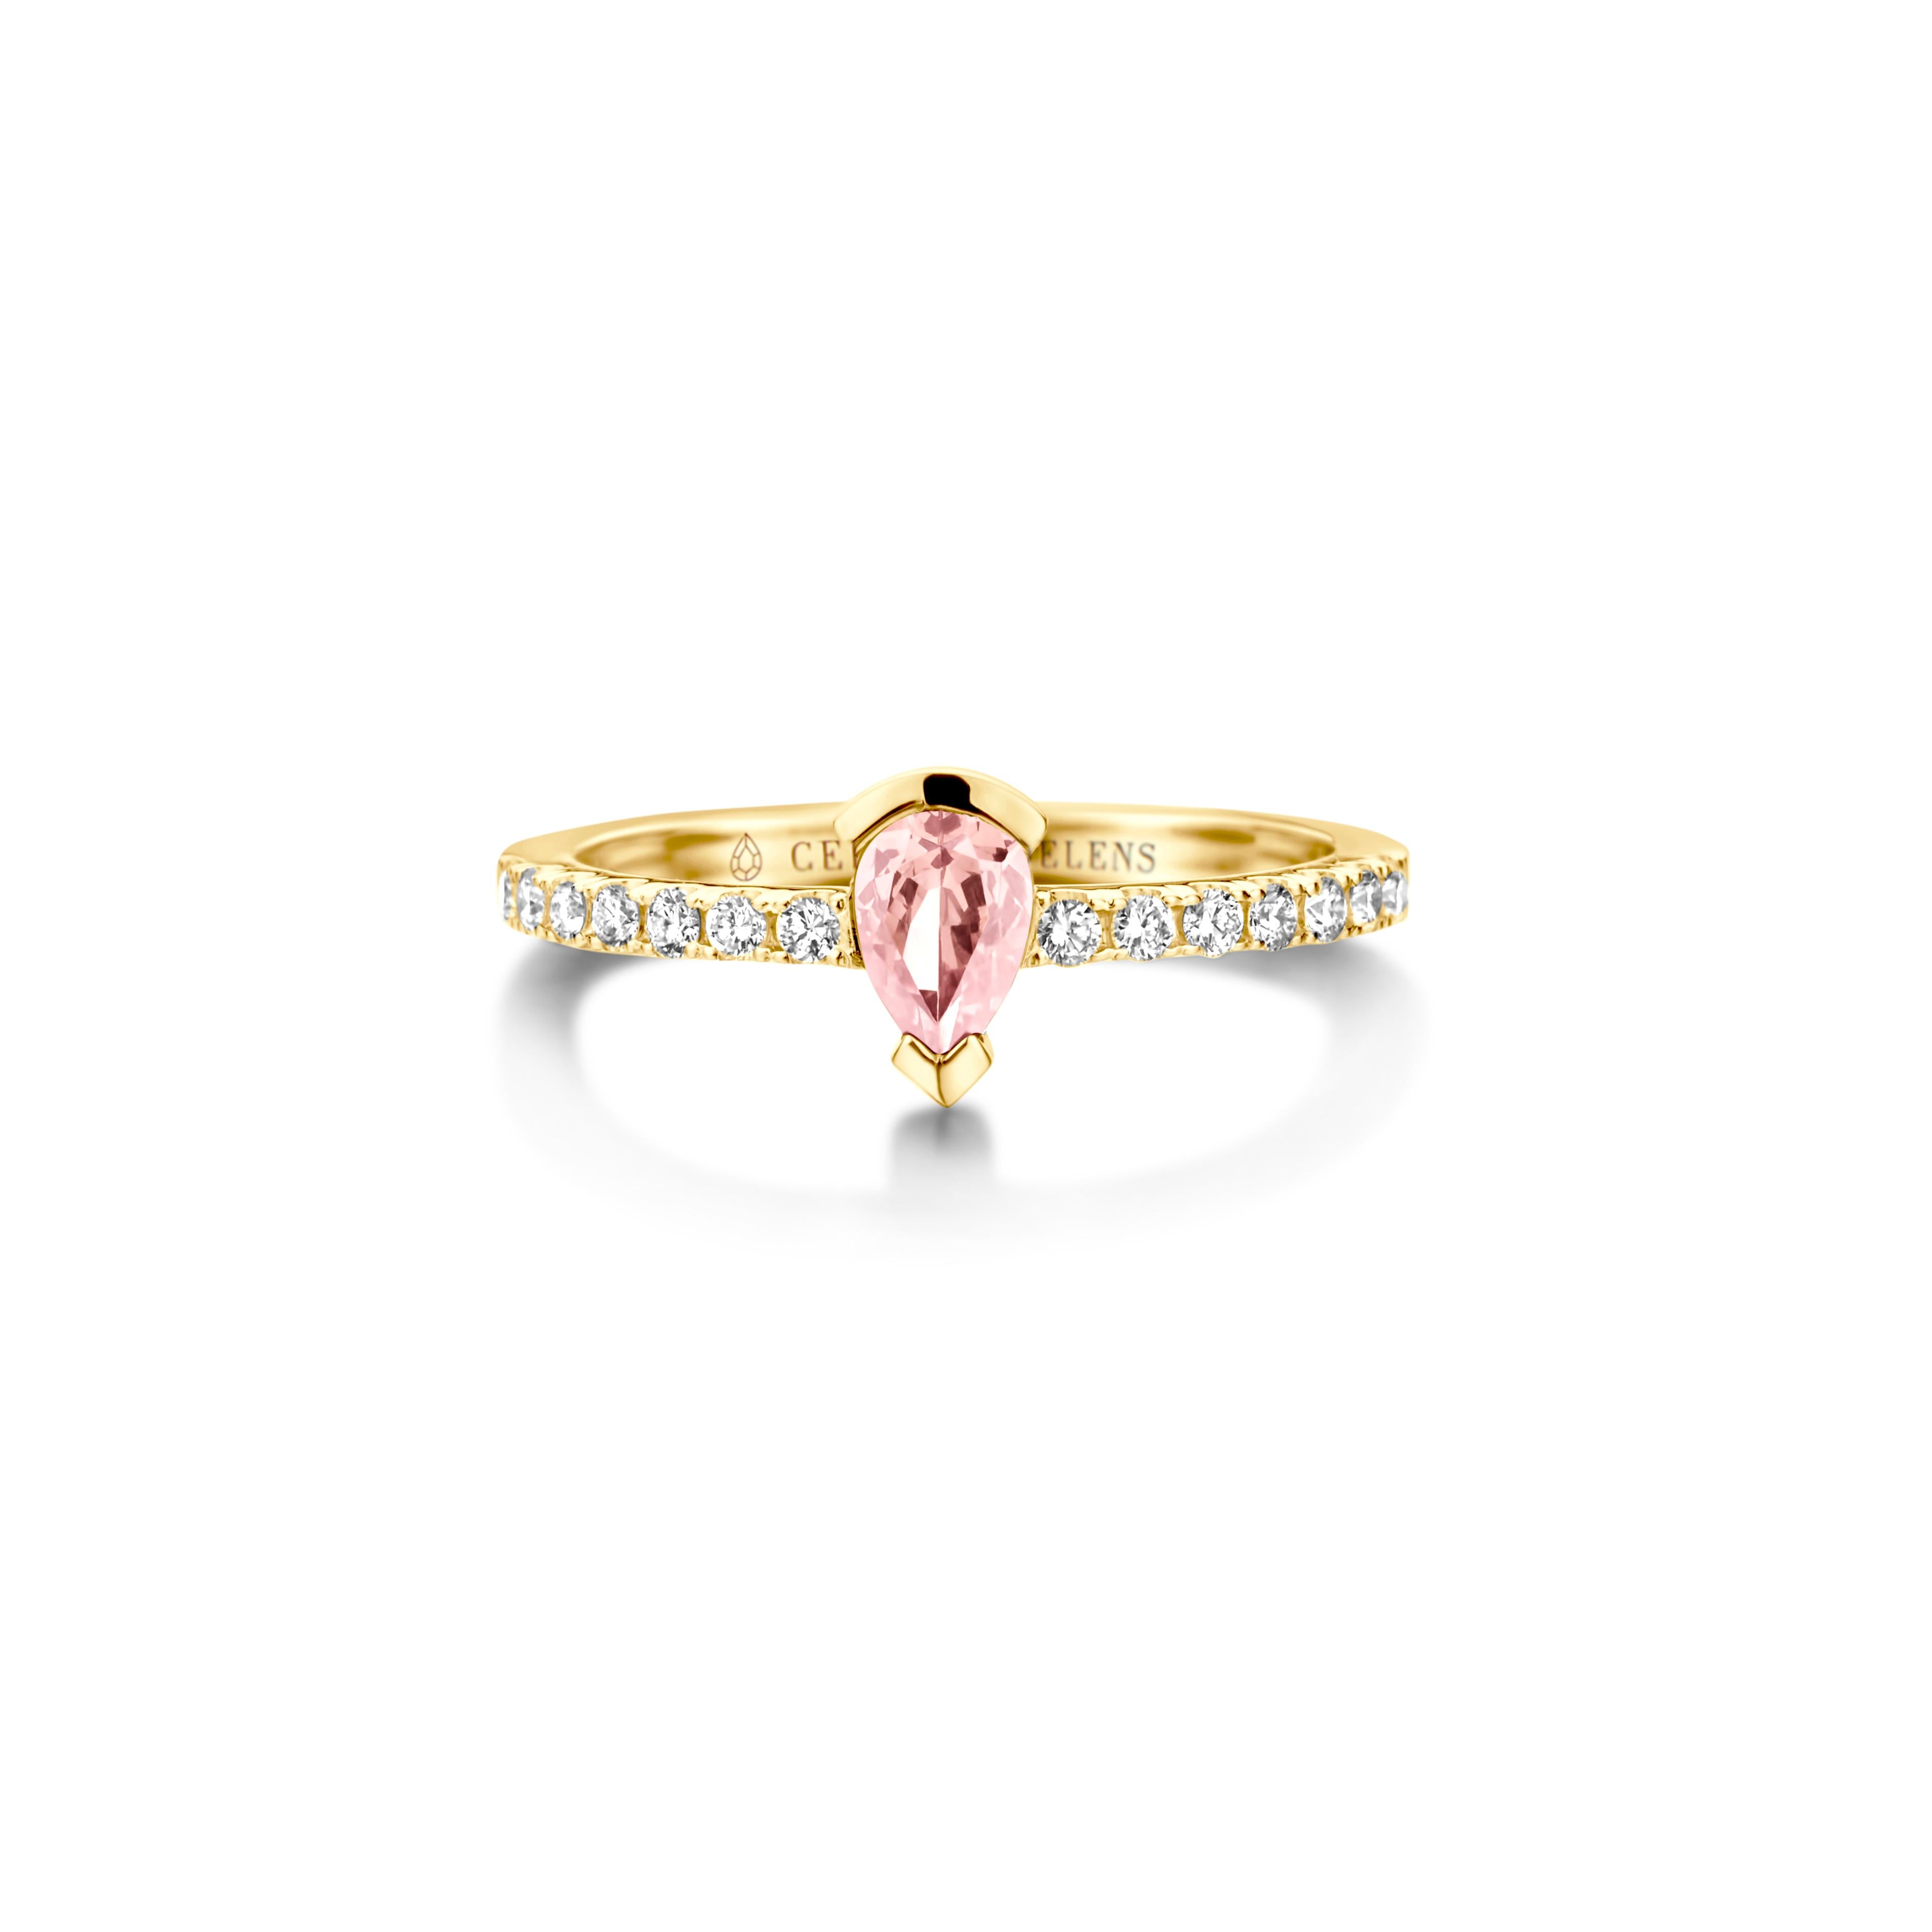 Adeline Straight ring in 18Kt white gold set with a pear-shaped morganite and 0,24 Ct of white brilliant cut diamonds - VS F quality. Also, available in yellow gold and white gold. Celine Roelens, a goldsmith and gemologist, is specialized in